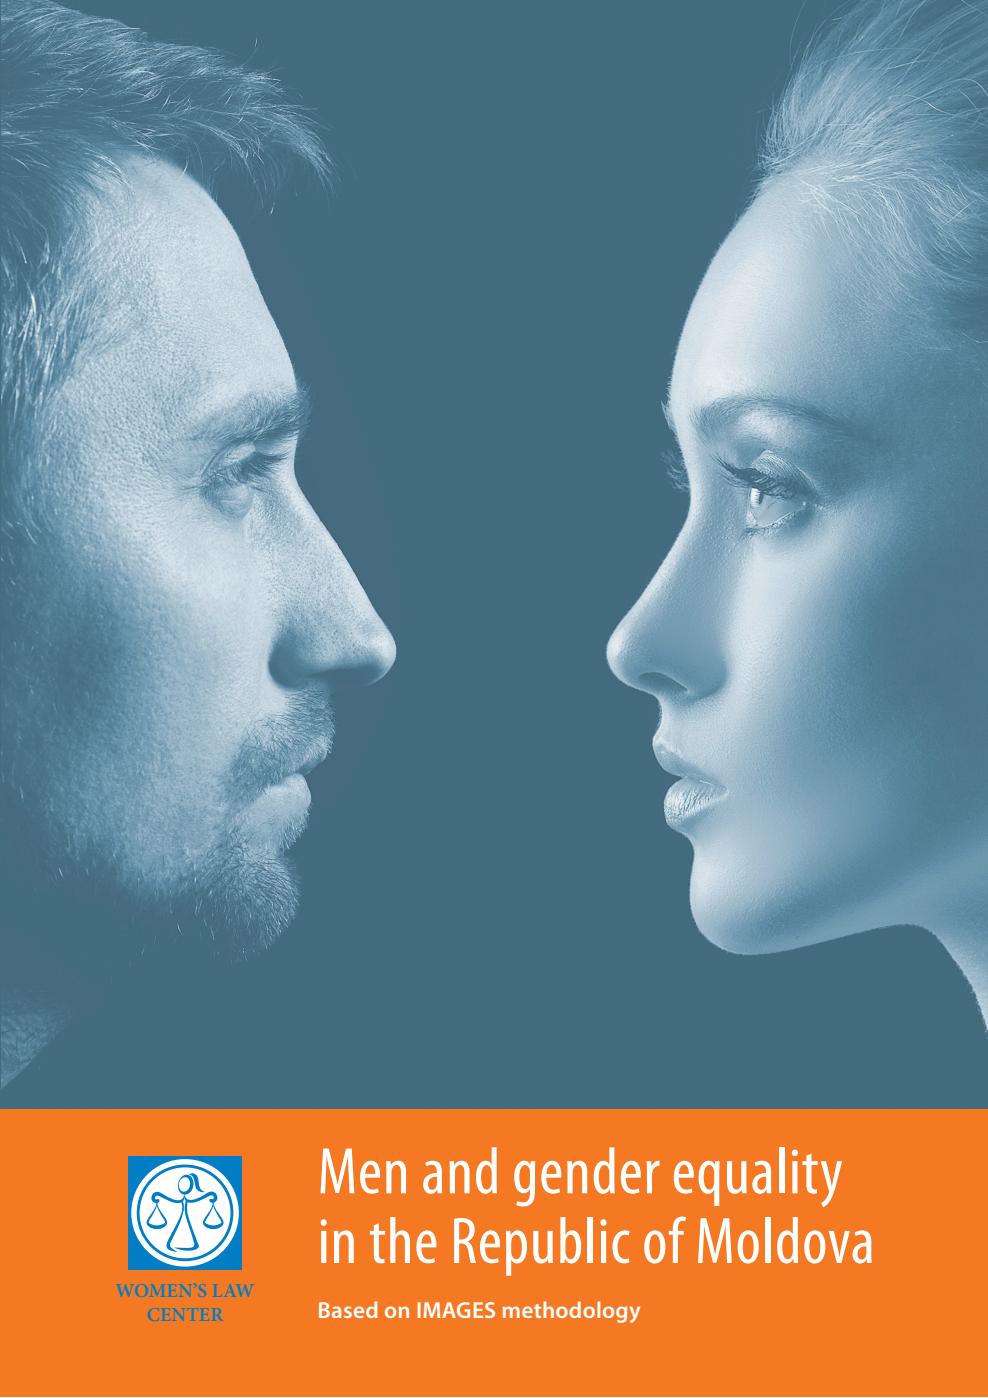 Survey “Men and gender equality in the Republic of Moldova”